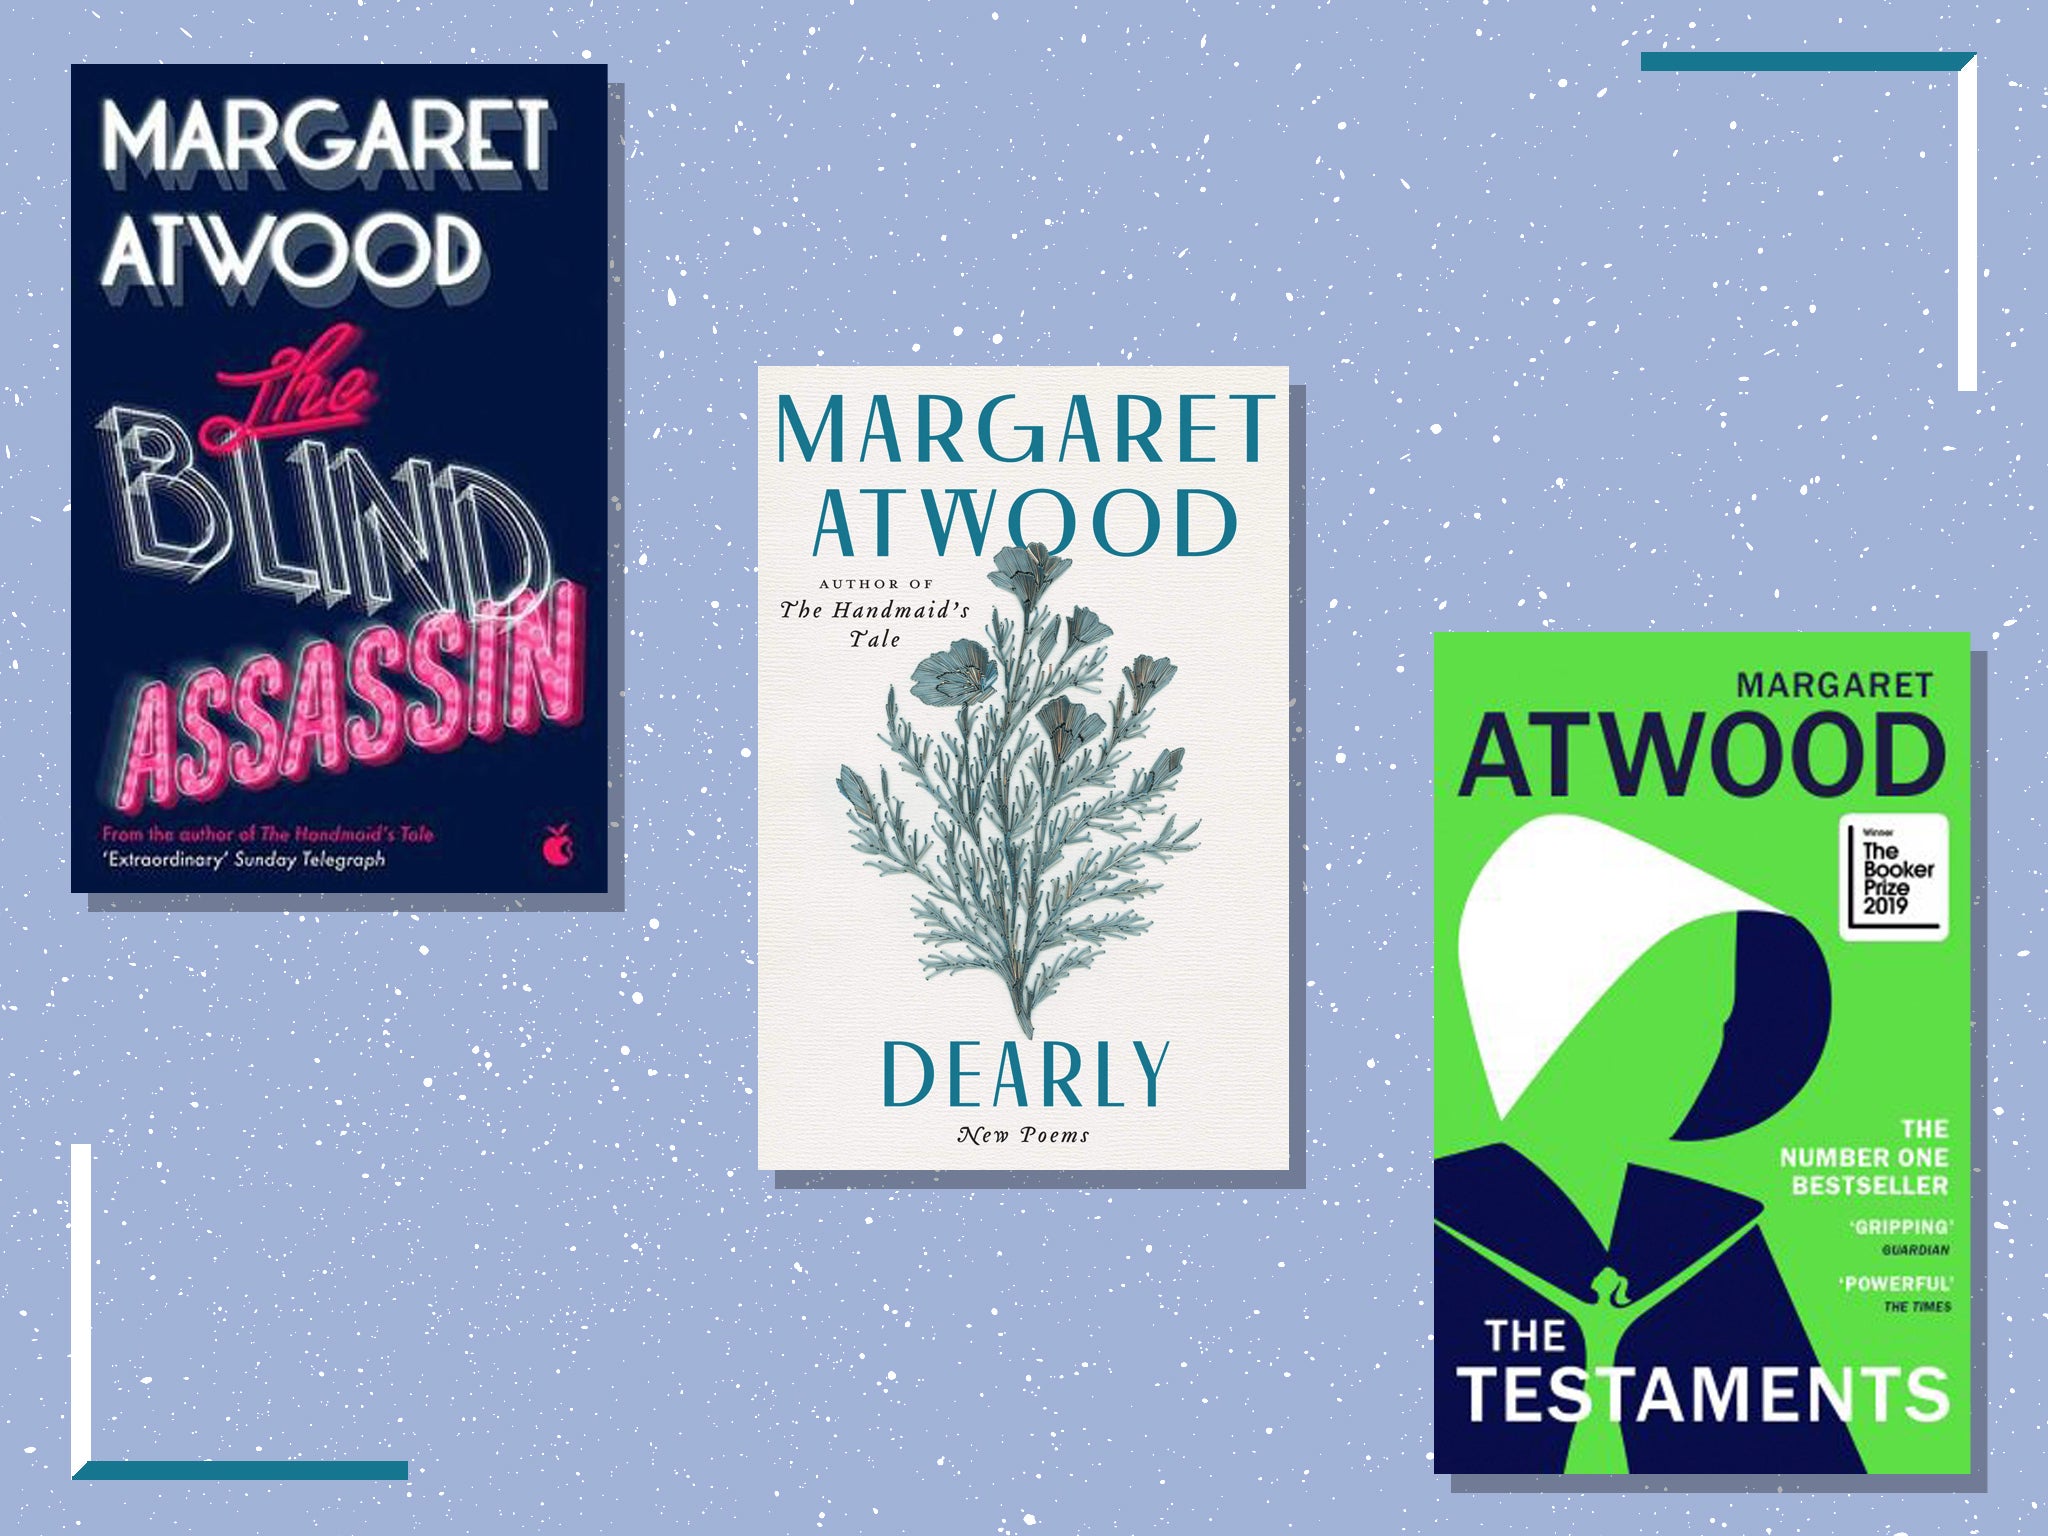 Atwood first began publishing in the 1960s